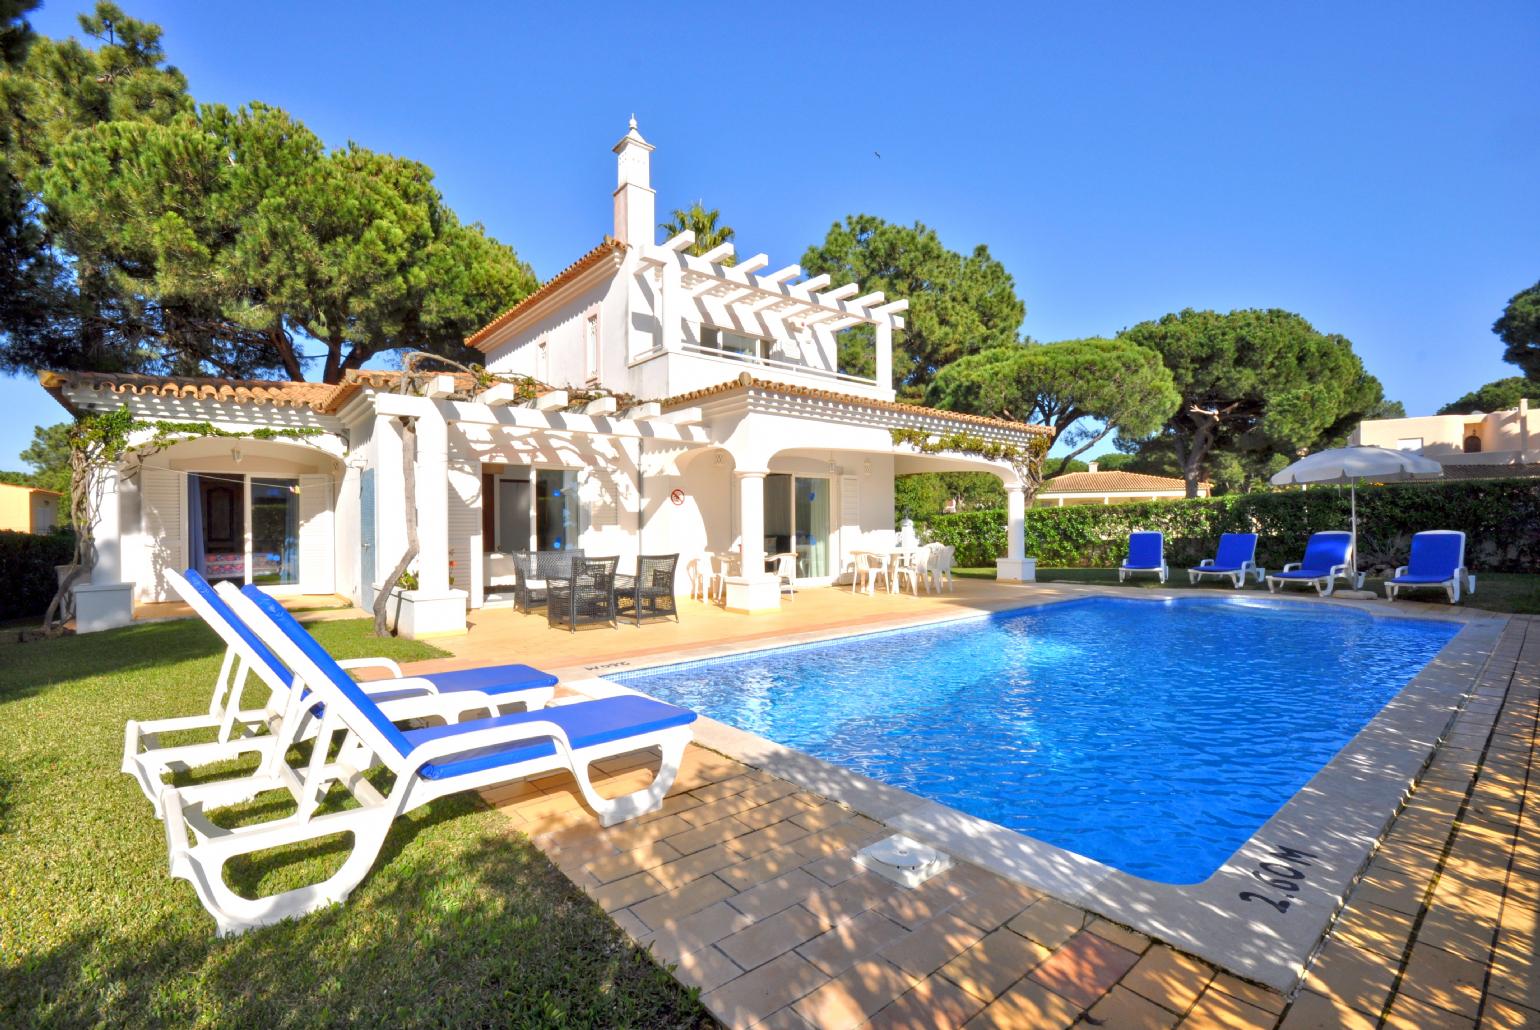 ,Beautiful villa with private pool and terrace area.